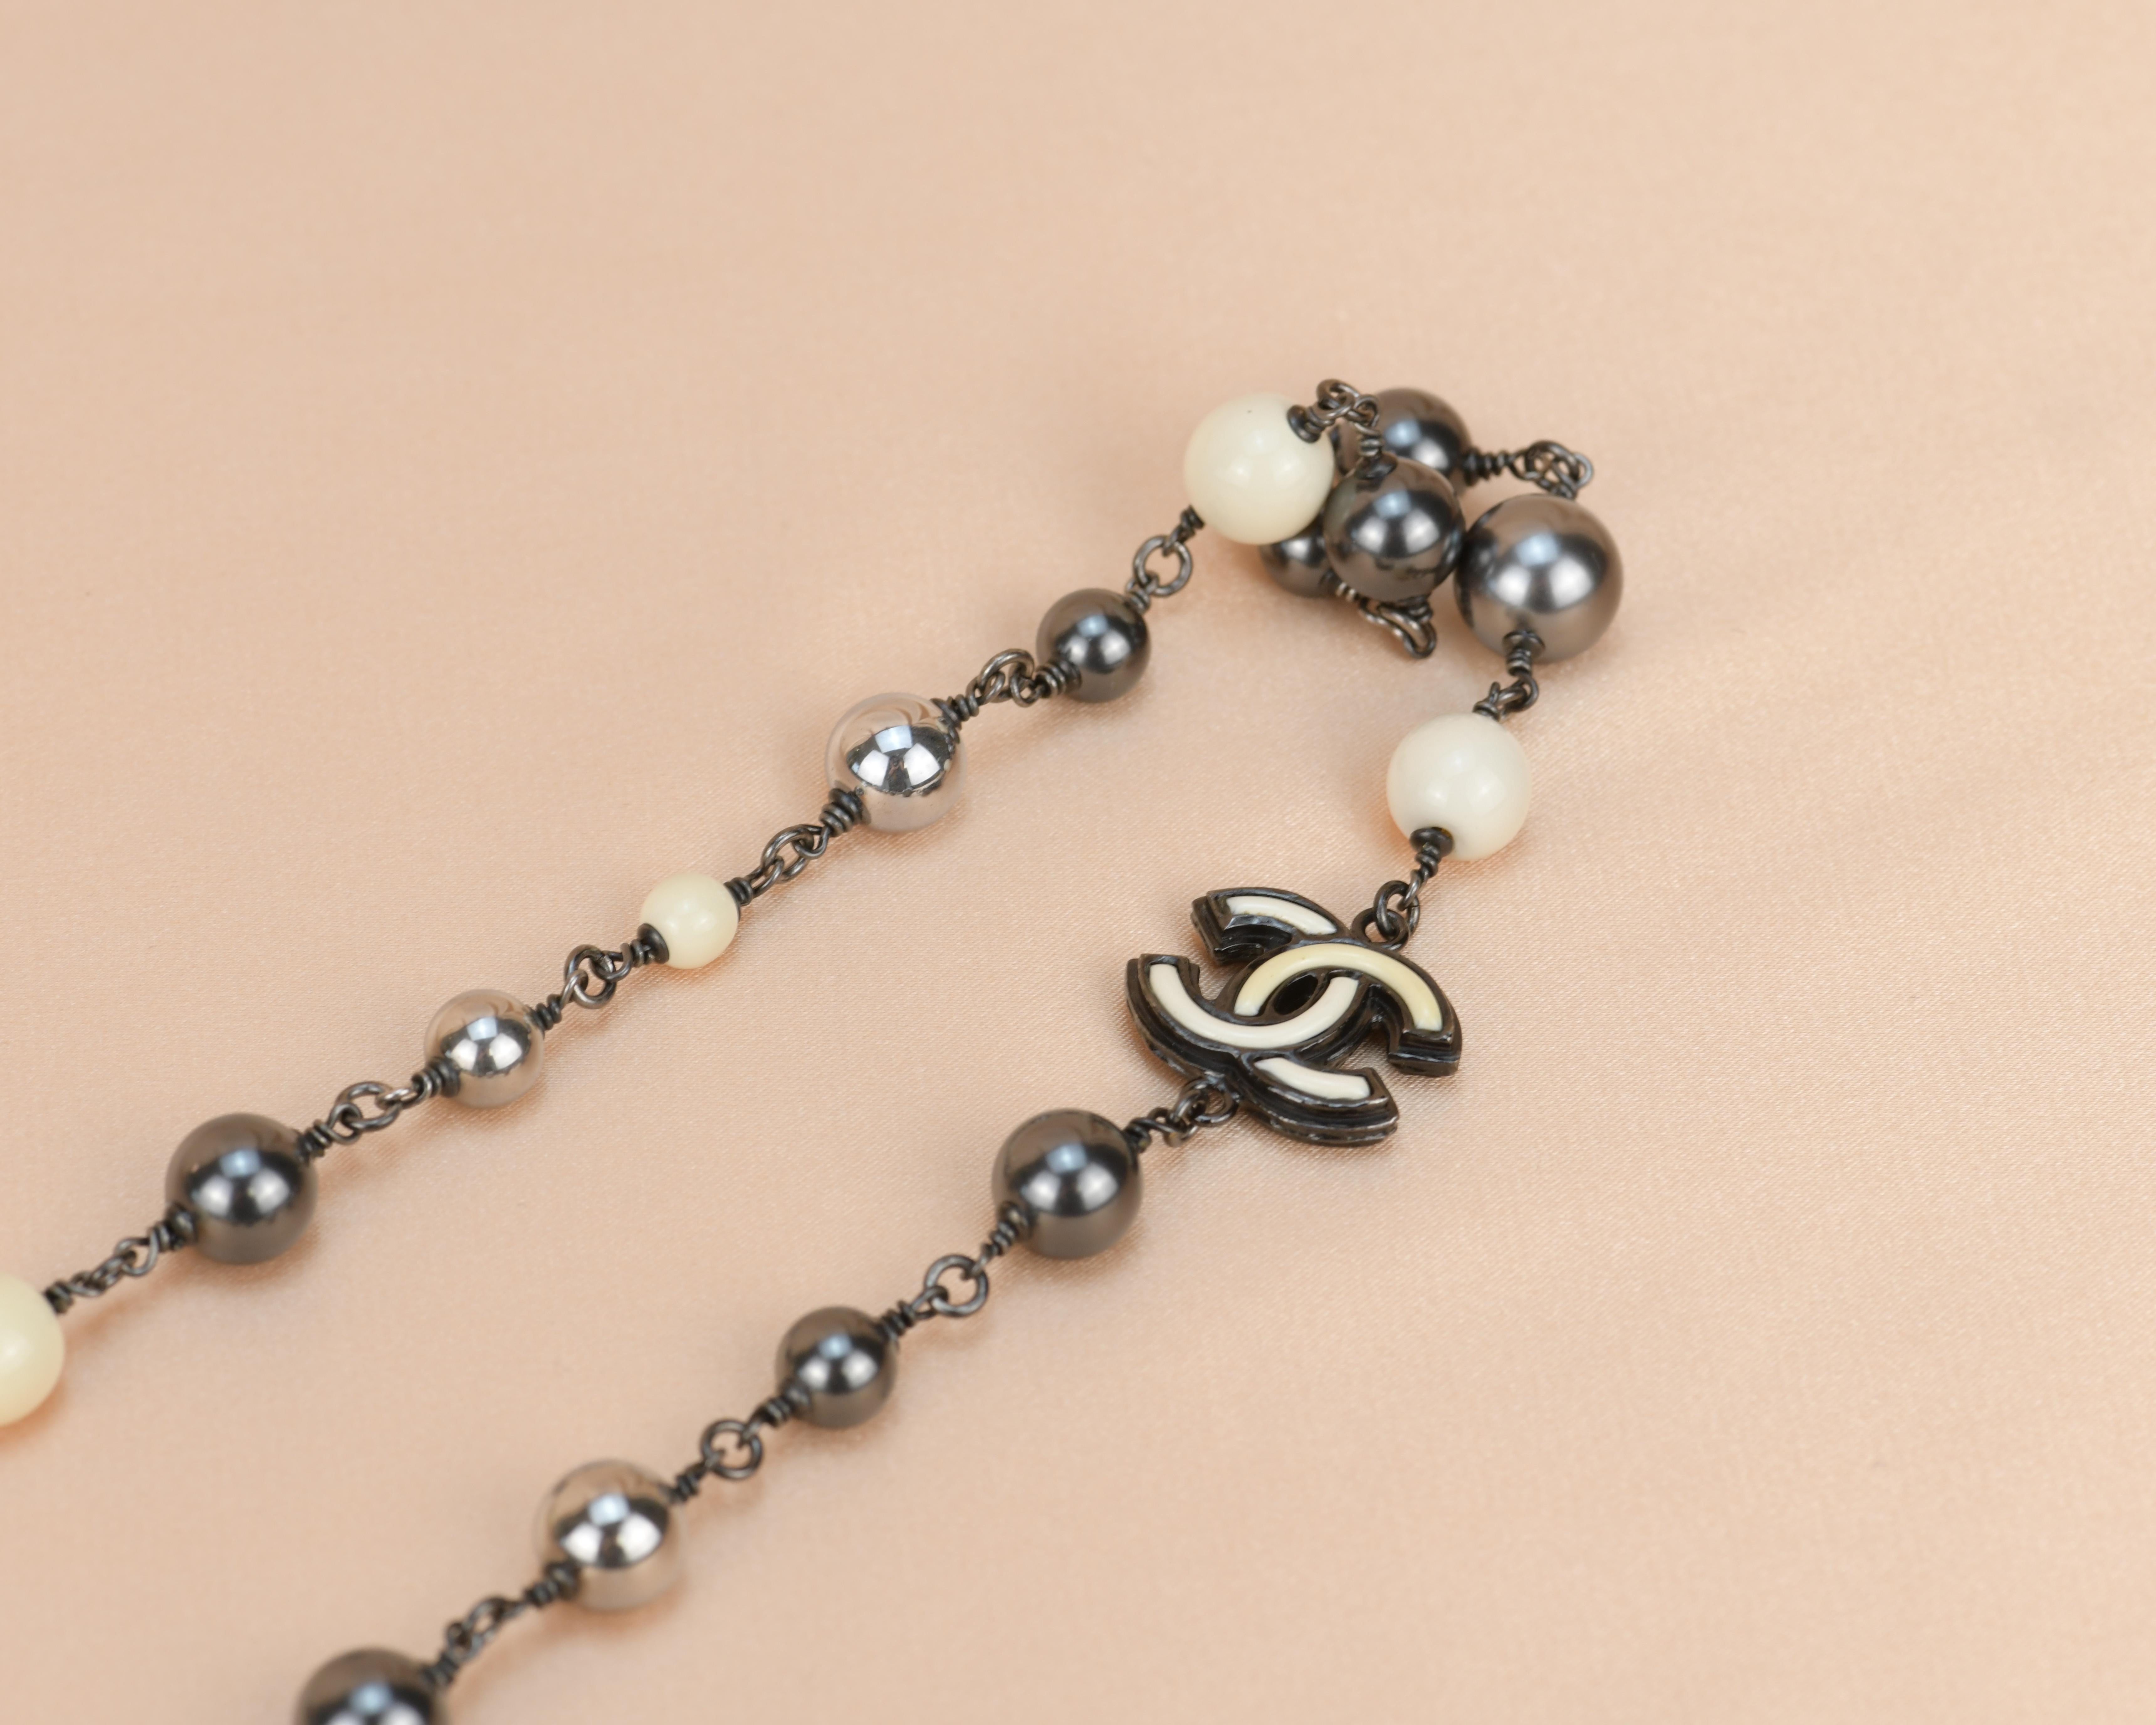 Chanel 2013 Pearl White and Black Beads CC Sautoir Necklace 9